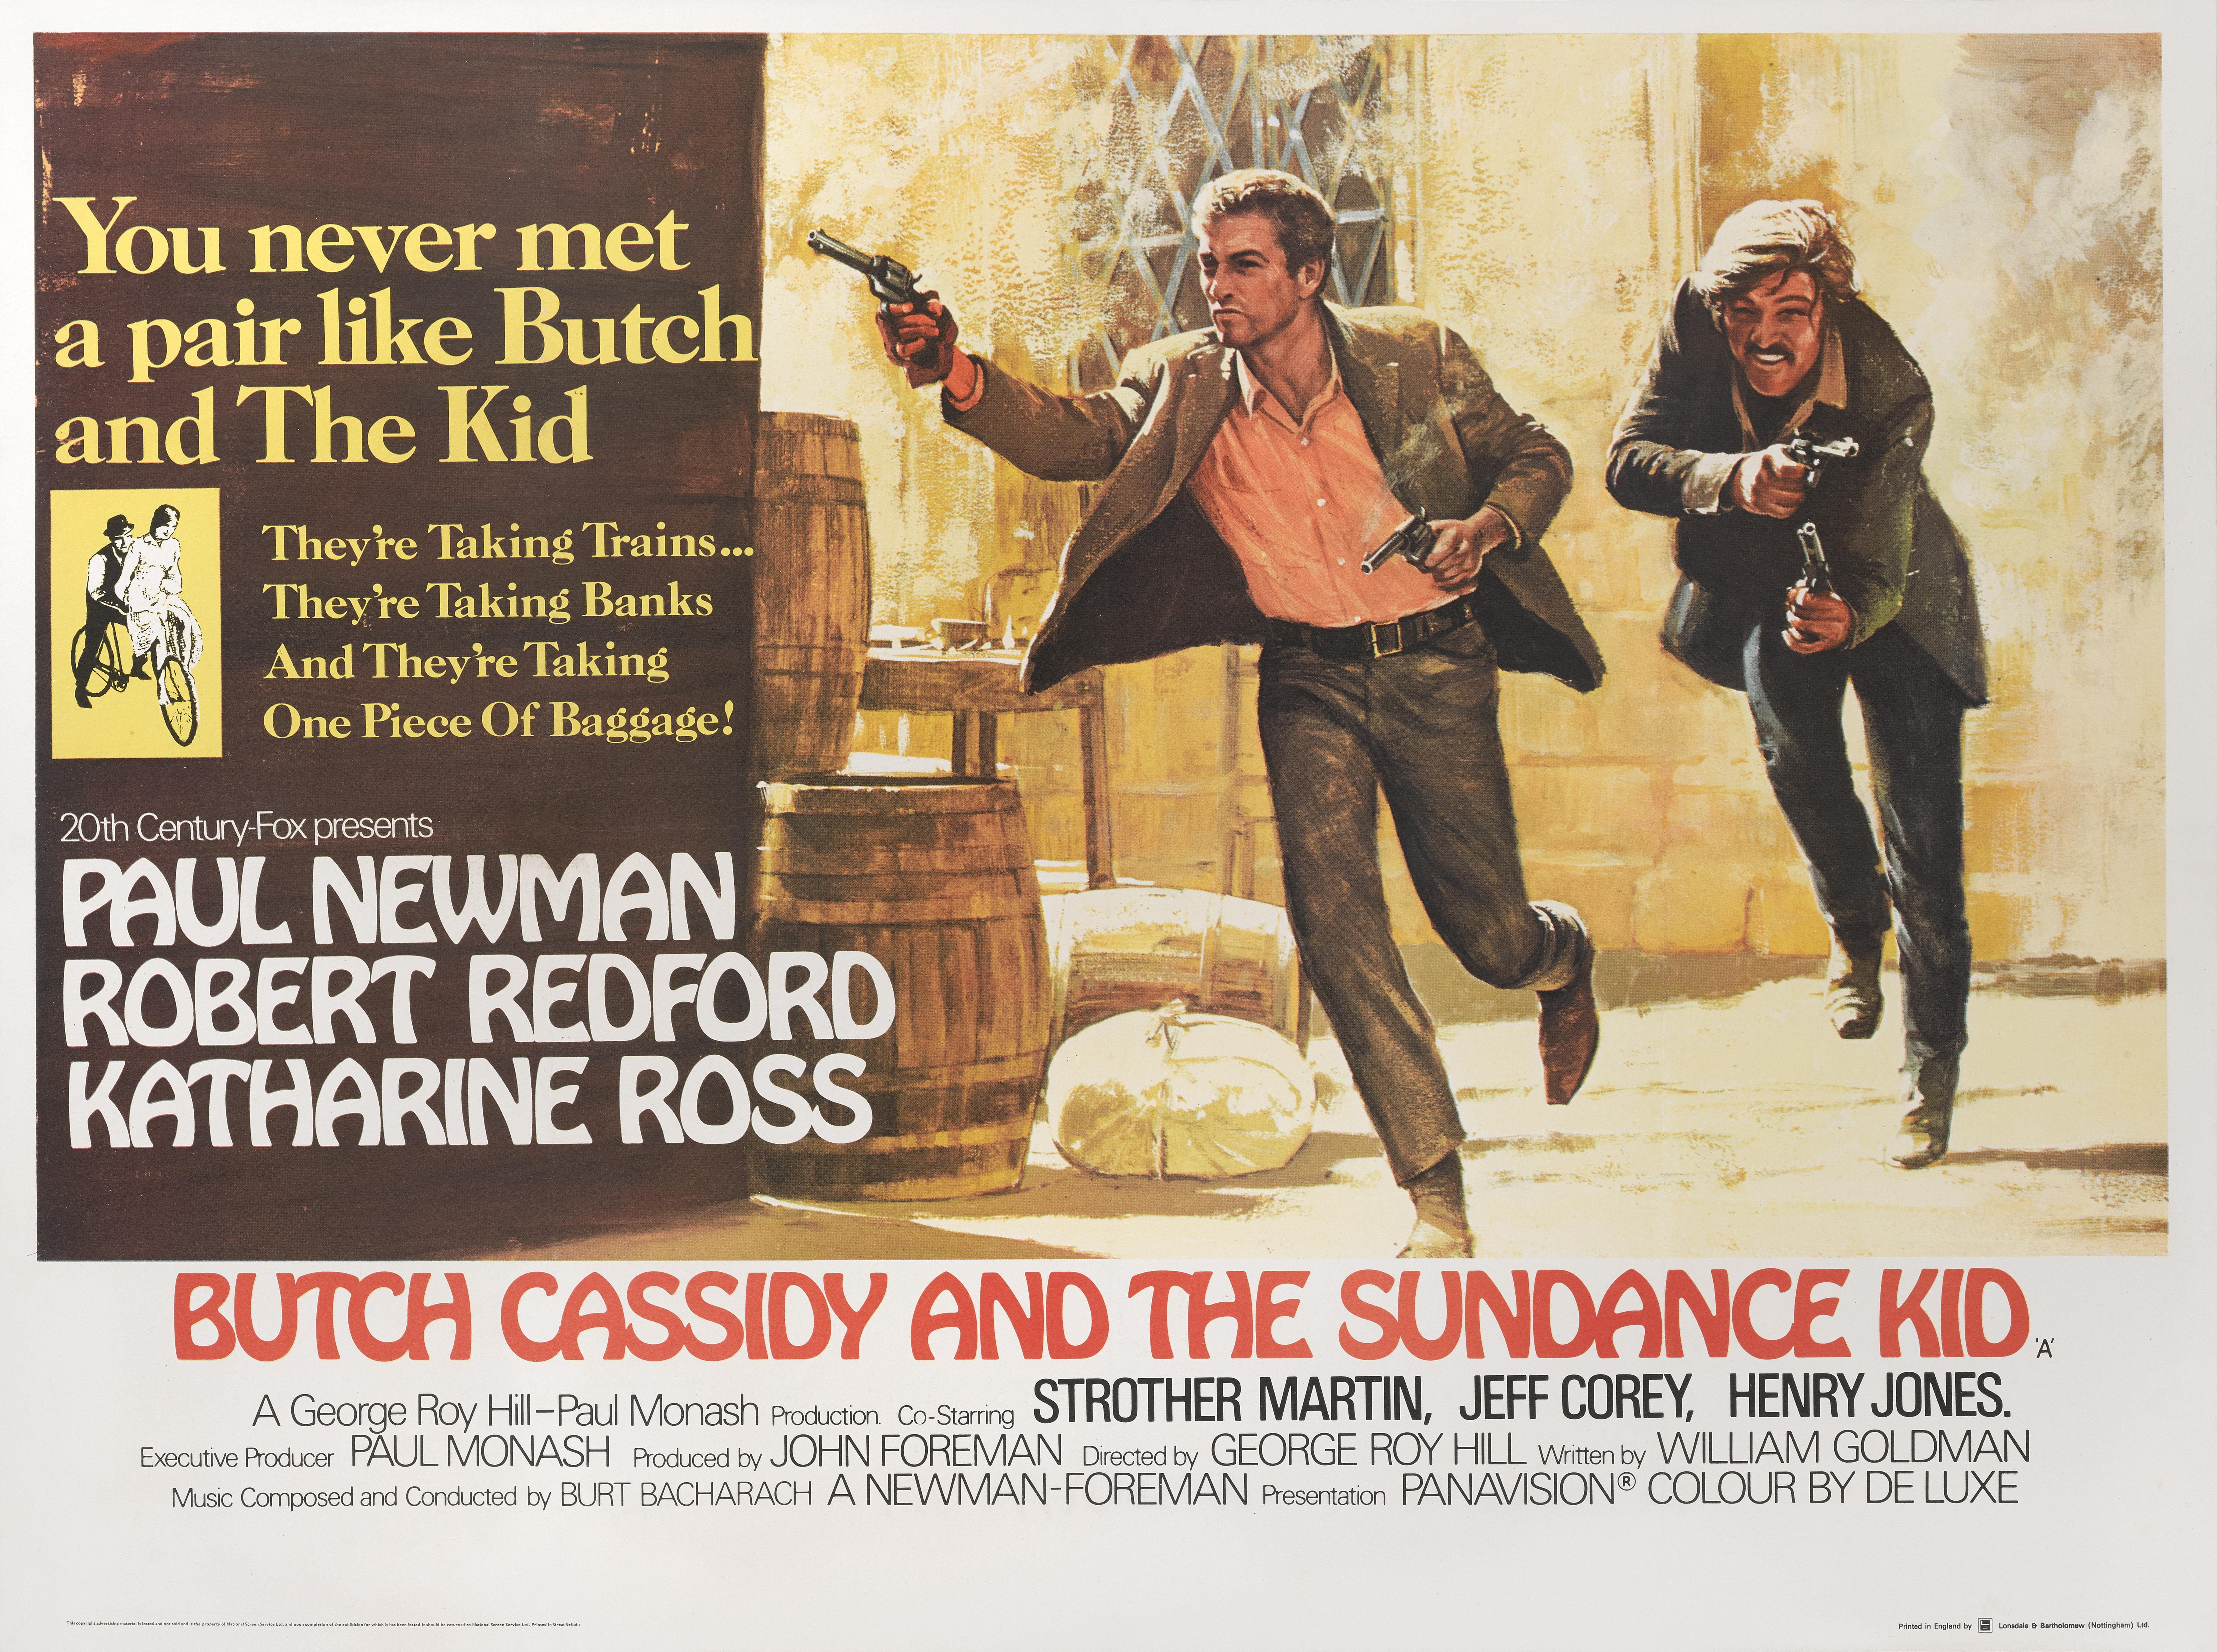 Original British film poster for the 1969 classic western staring Paul Newman, Robert Redford, Katherine Ross. This film was directed by George Roy Hill. This size poster would have been used outside the cinema at the time of the films release in